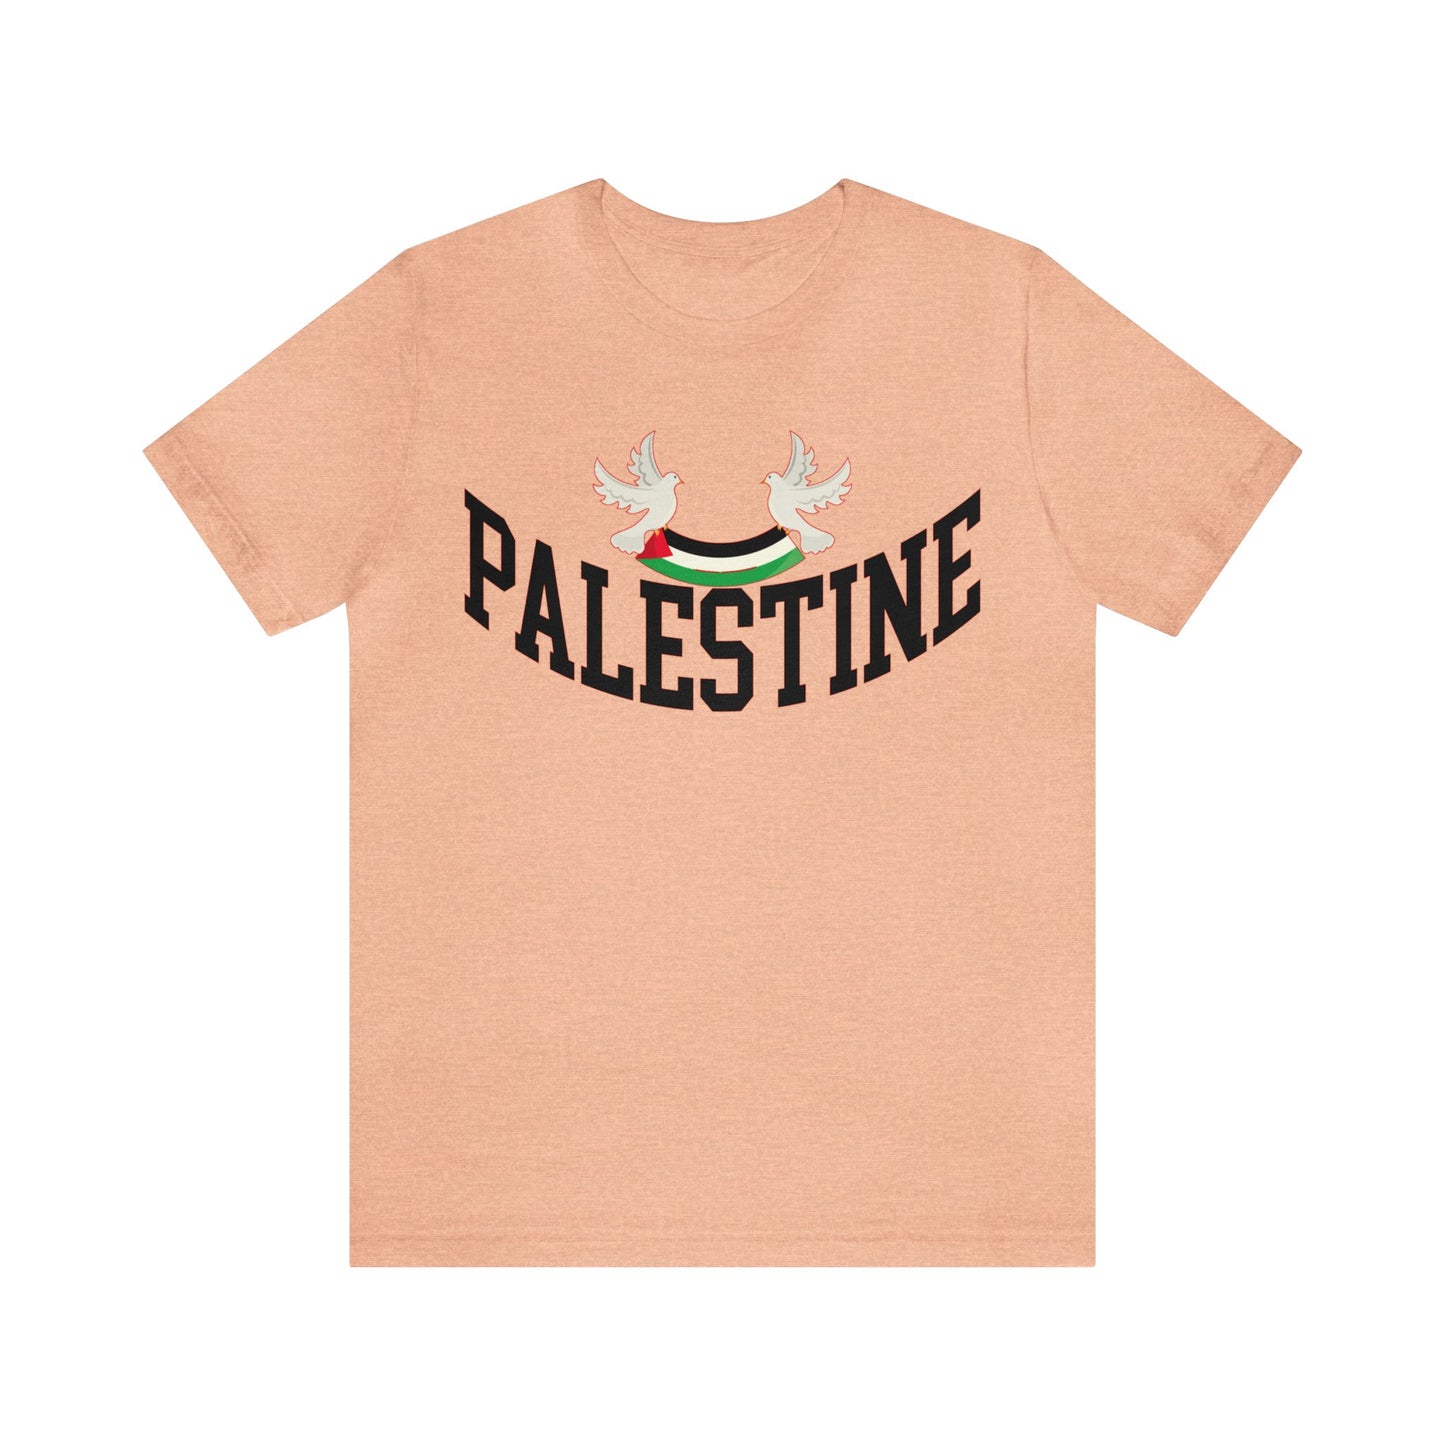 Free Palestine Shirt, All Profit Support Palestine, Free Palestine Sweater, Palestine Flag Crewneck, Stand With Palestine Shirt, T1366